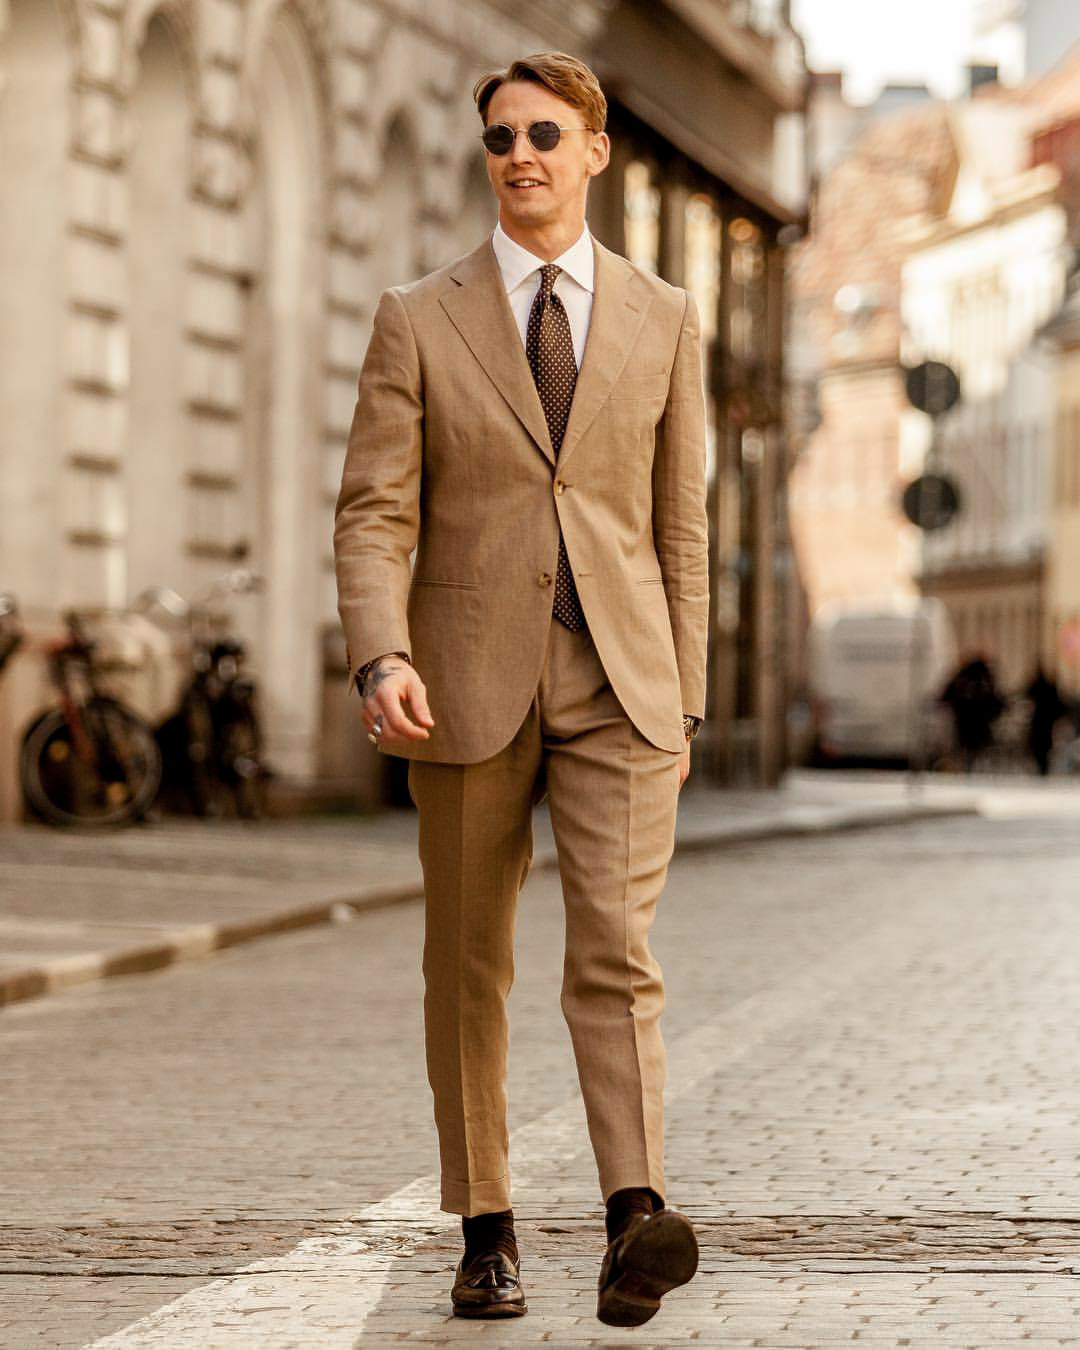 Formally wearing a khaki suit with brown dress shoes